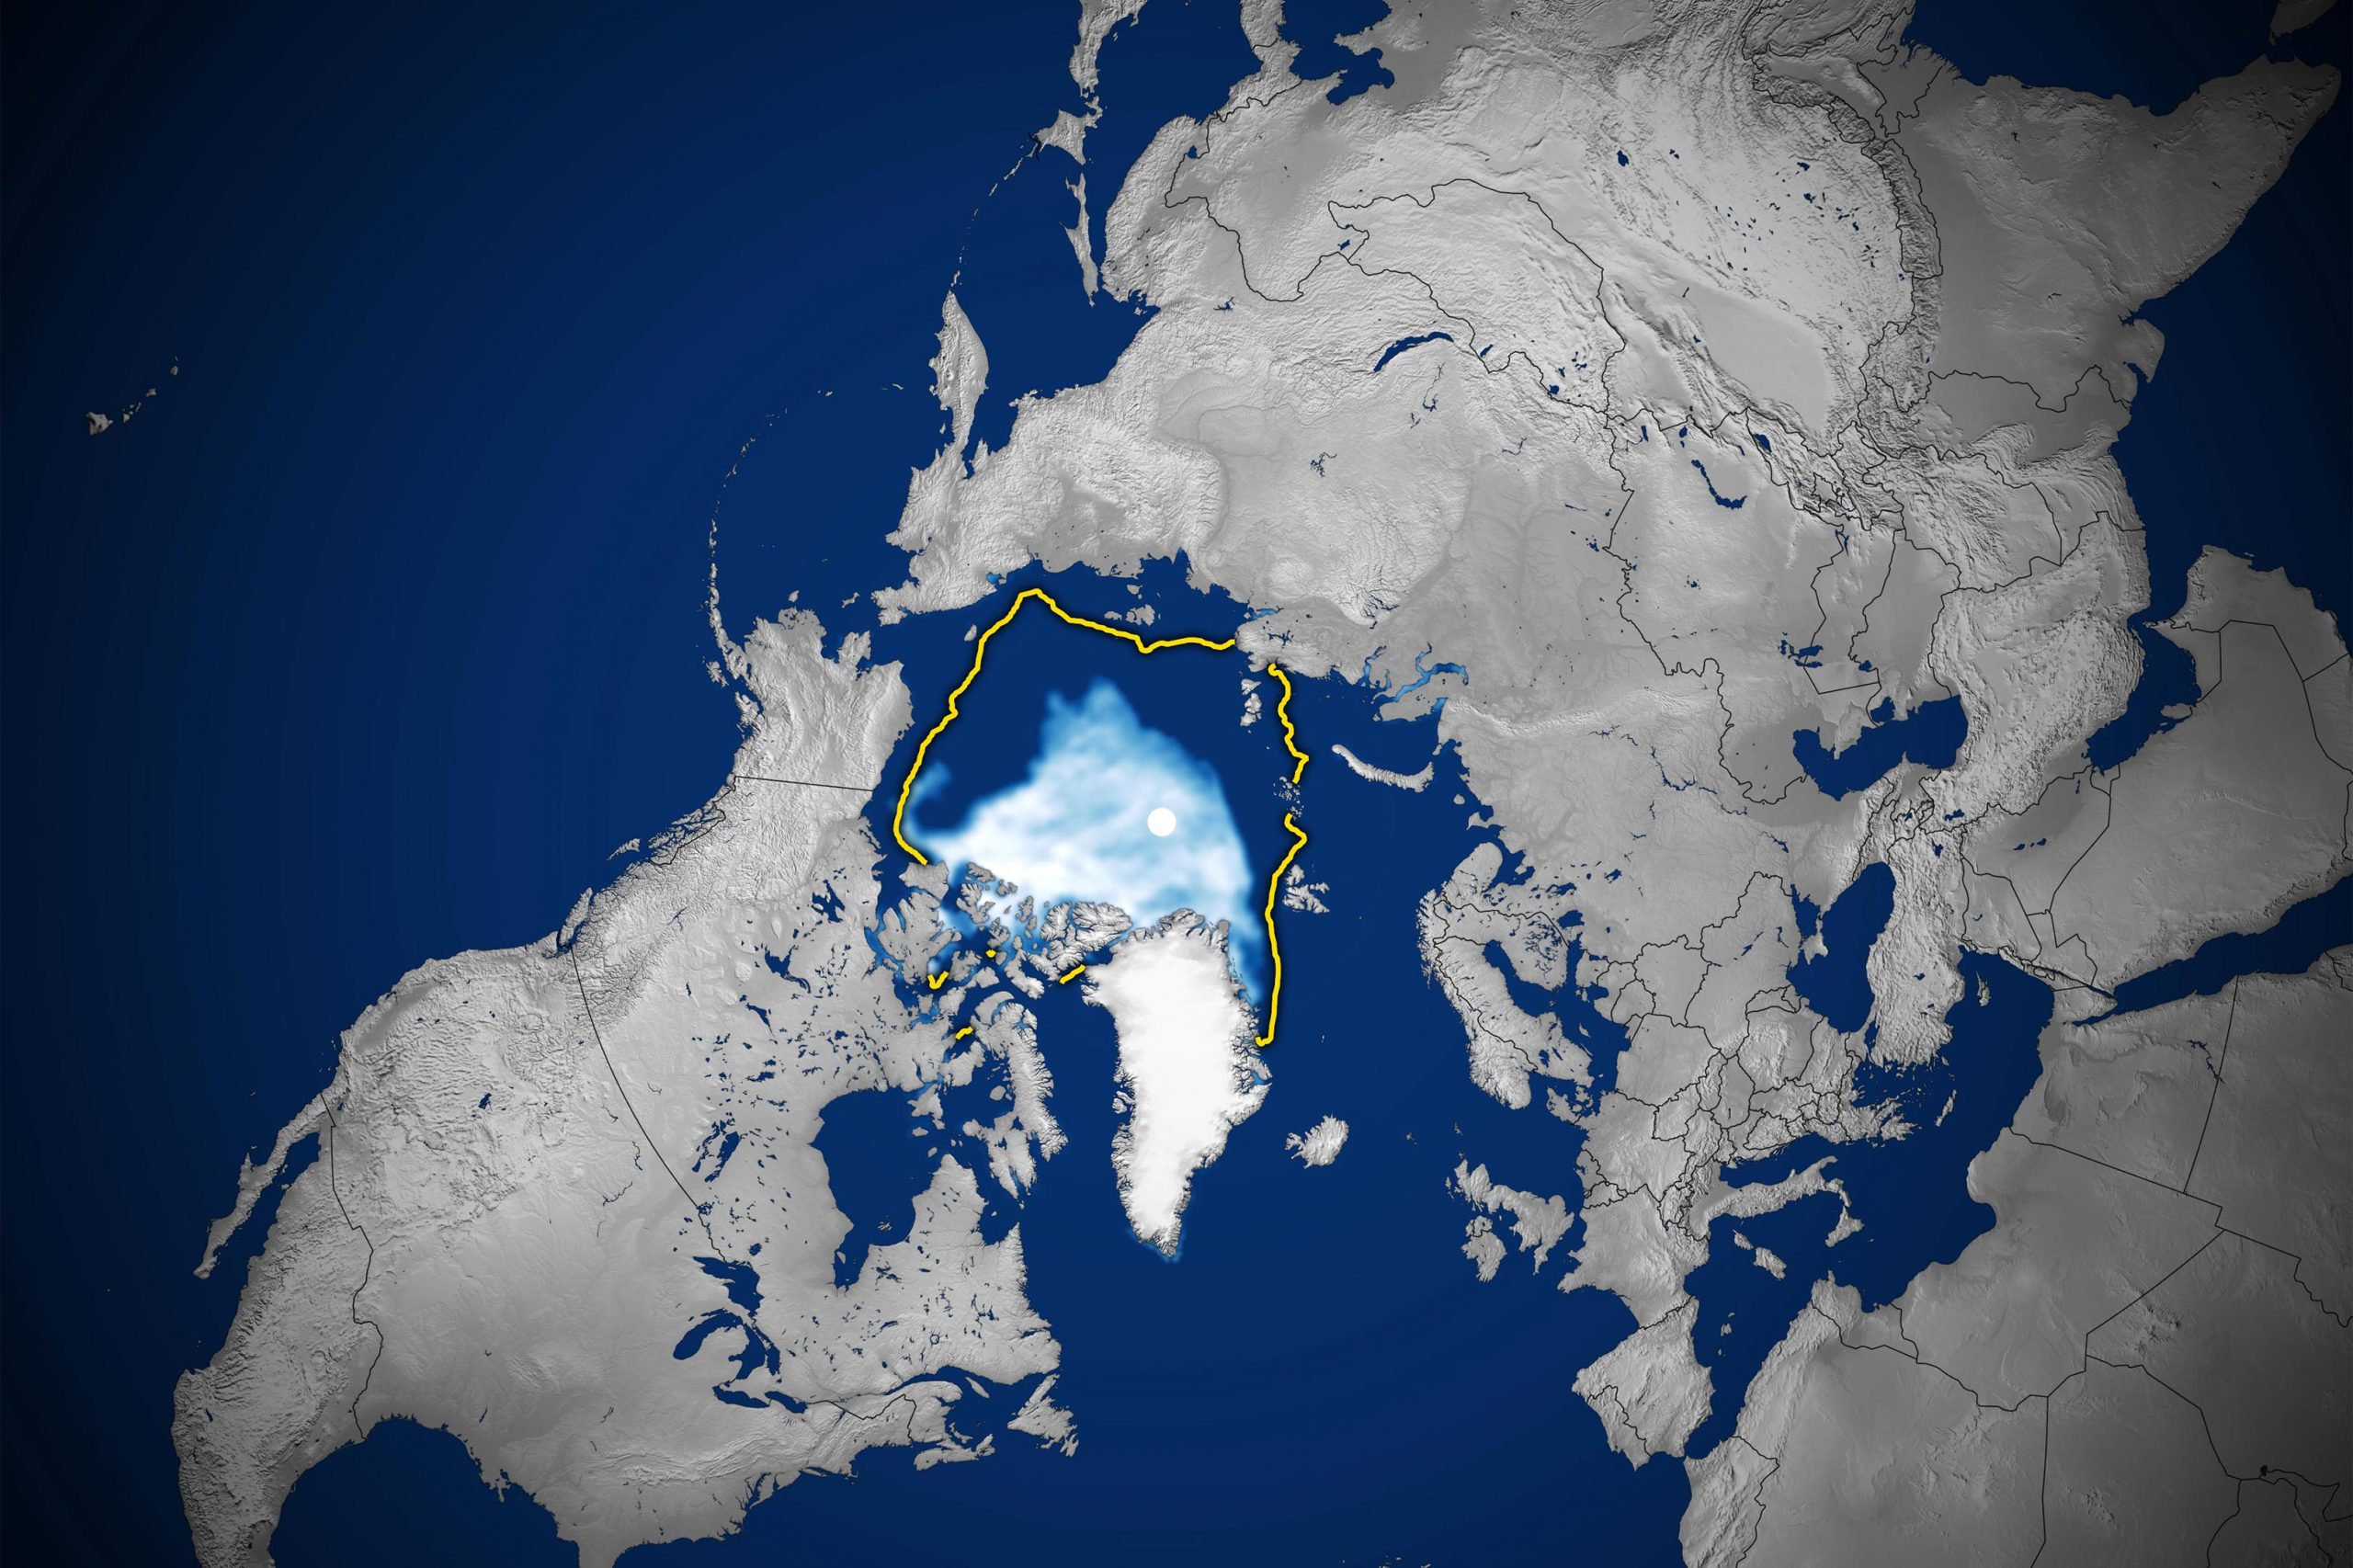 Arctic Sea Ice Concentration September 2020 Scaled 